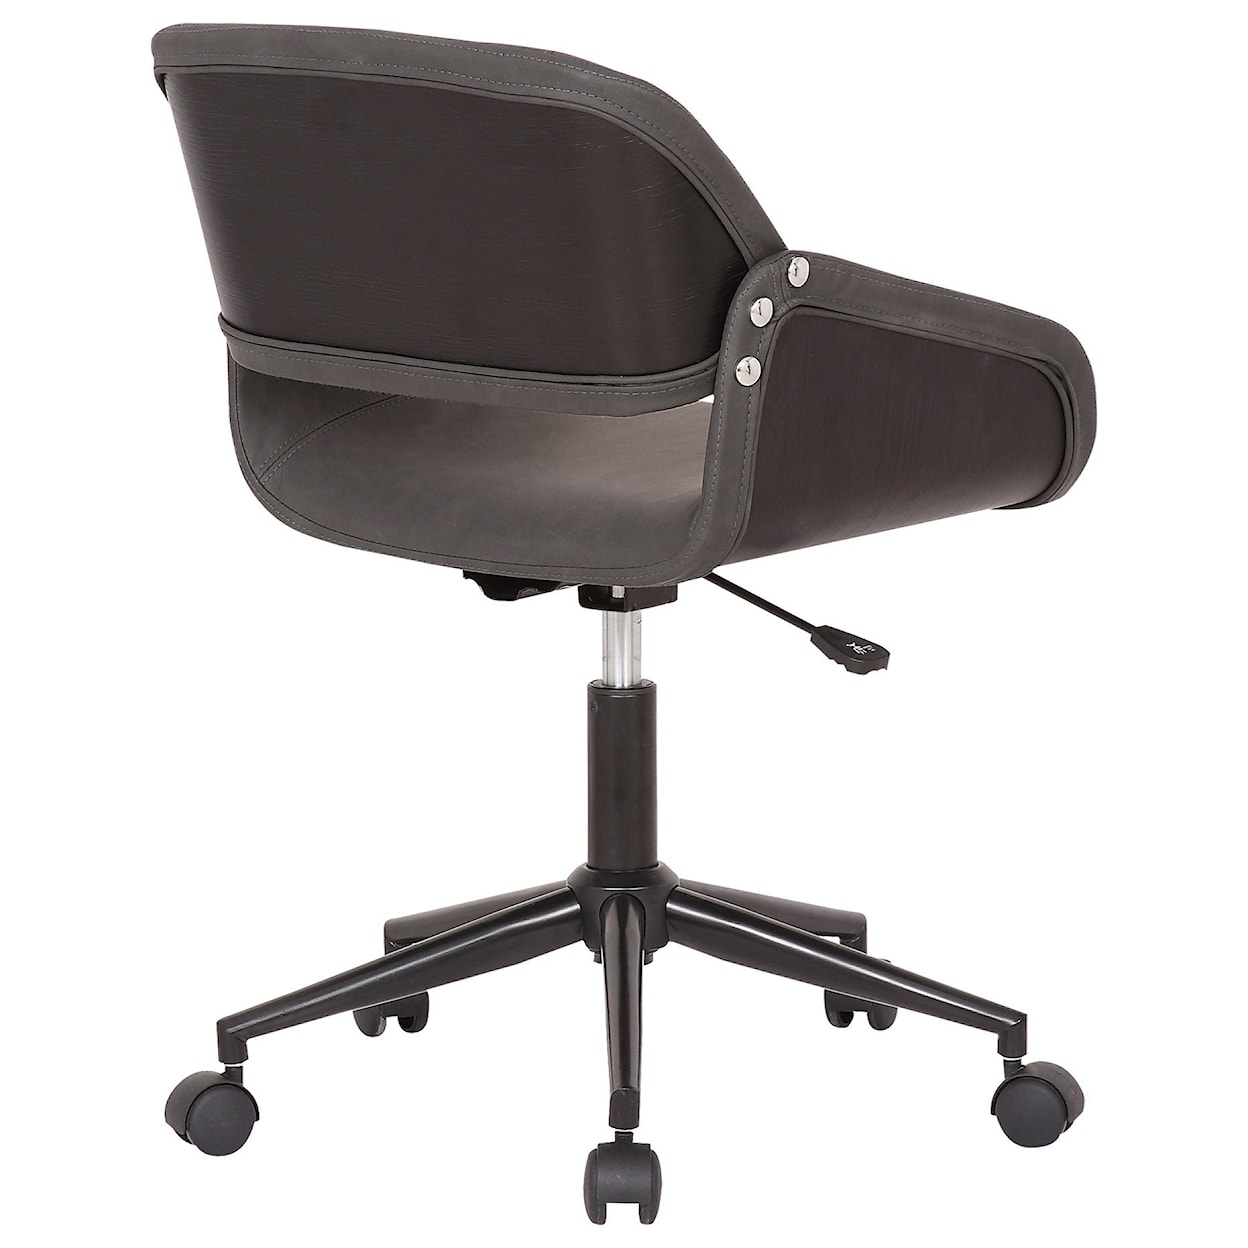 Armen Living Lowell Mid-Century Grey Faux Leather Task Chair